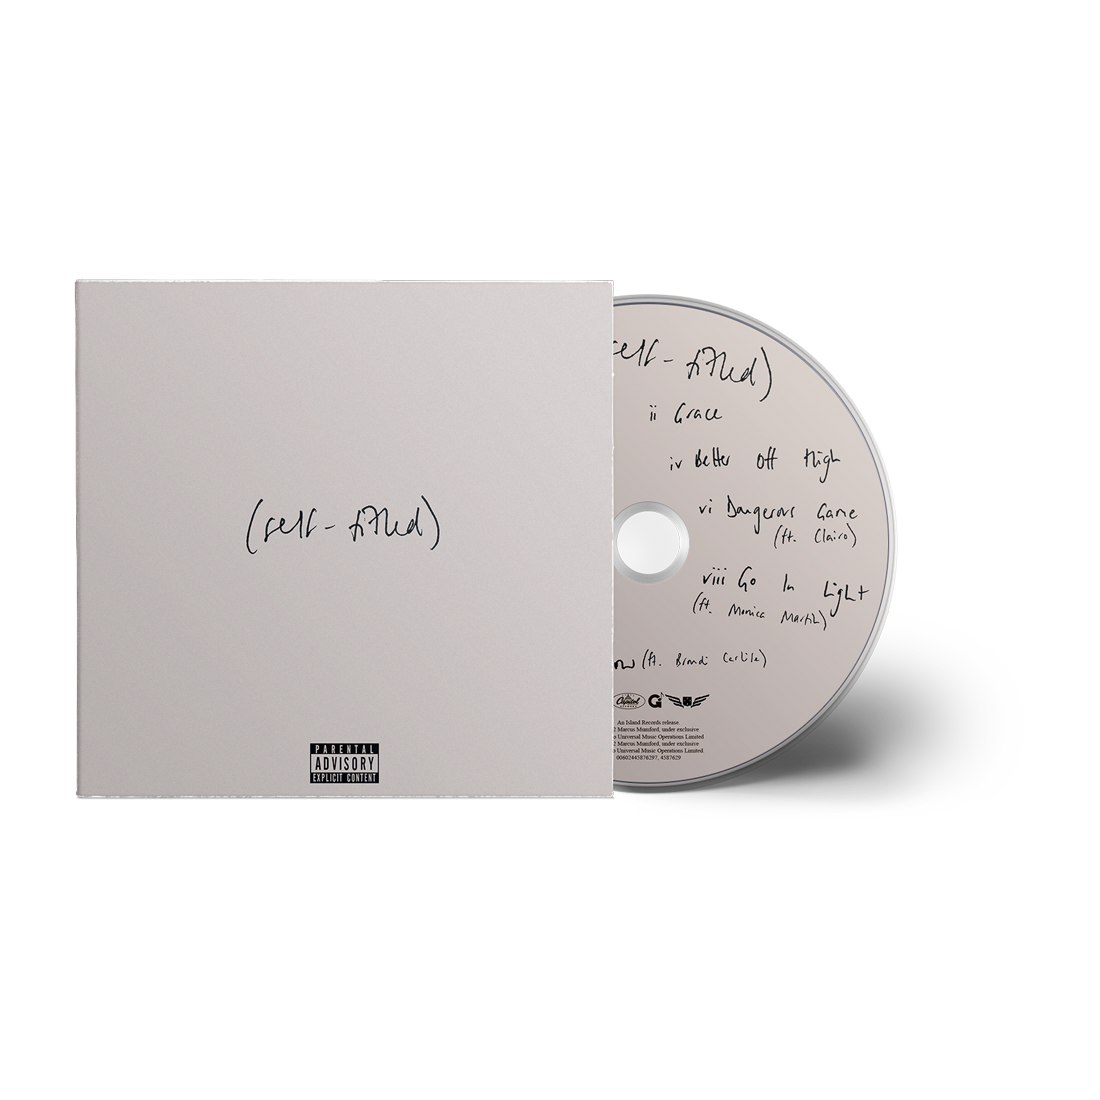 Marcus Mumford - (self-titled) Deluxe CD